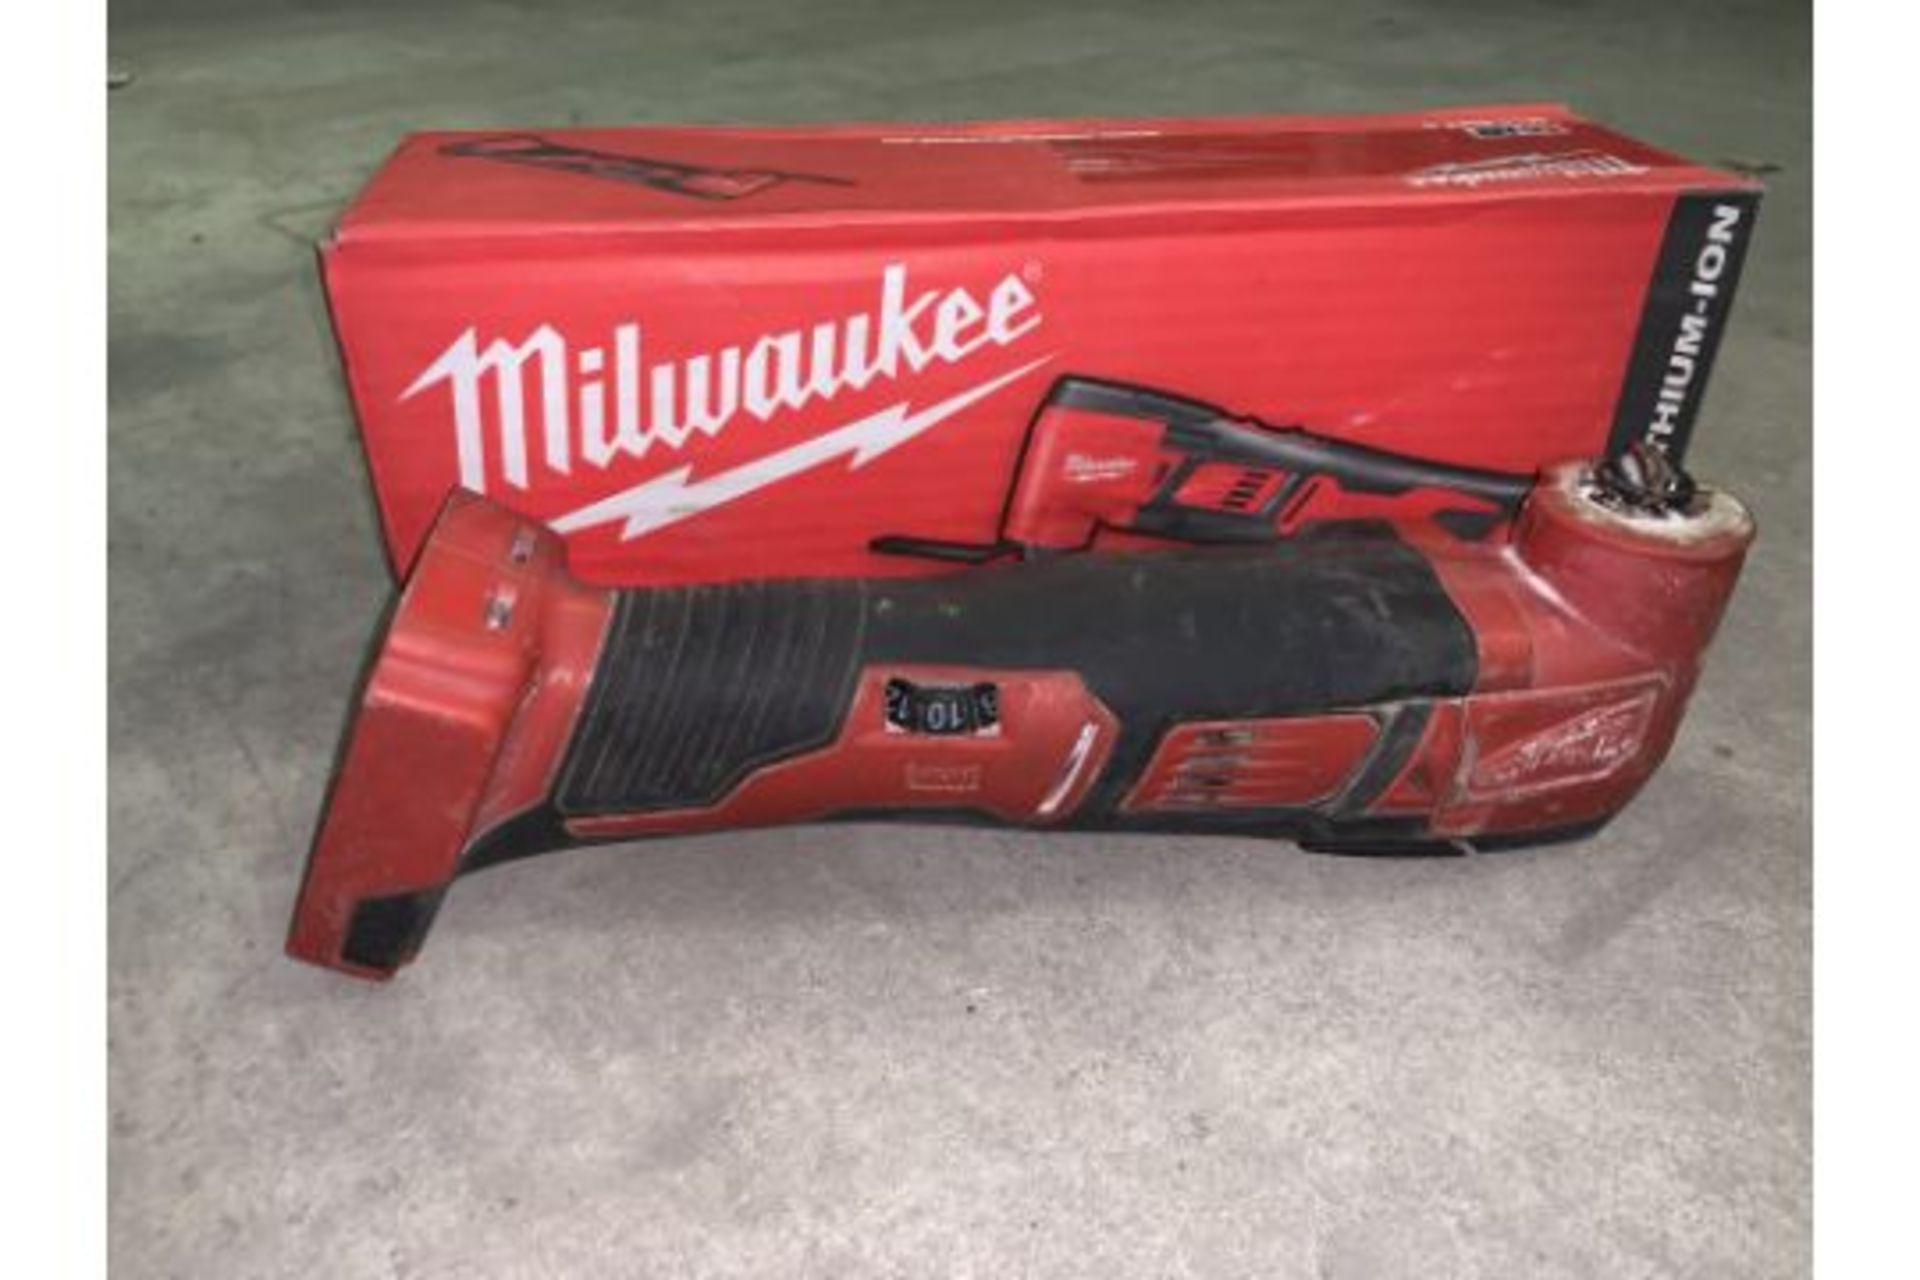 MILWAUKEE M18 BMT-0 18V LI-ION CORDLESS MULTI-TOOL COMES WITH BOX (UNCHECKED / UNTESTED ) 208